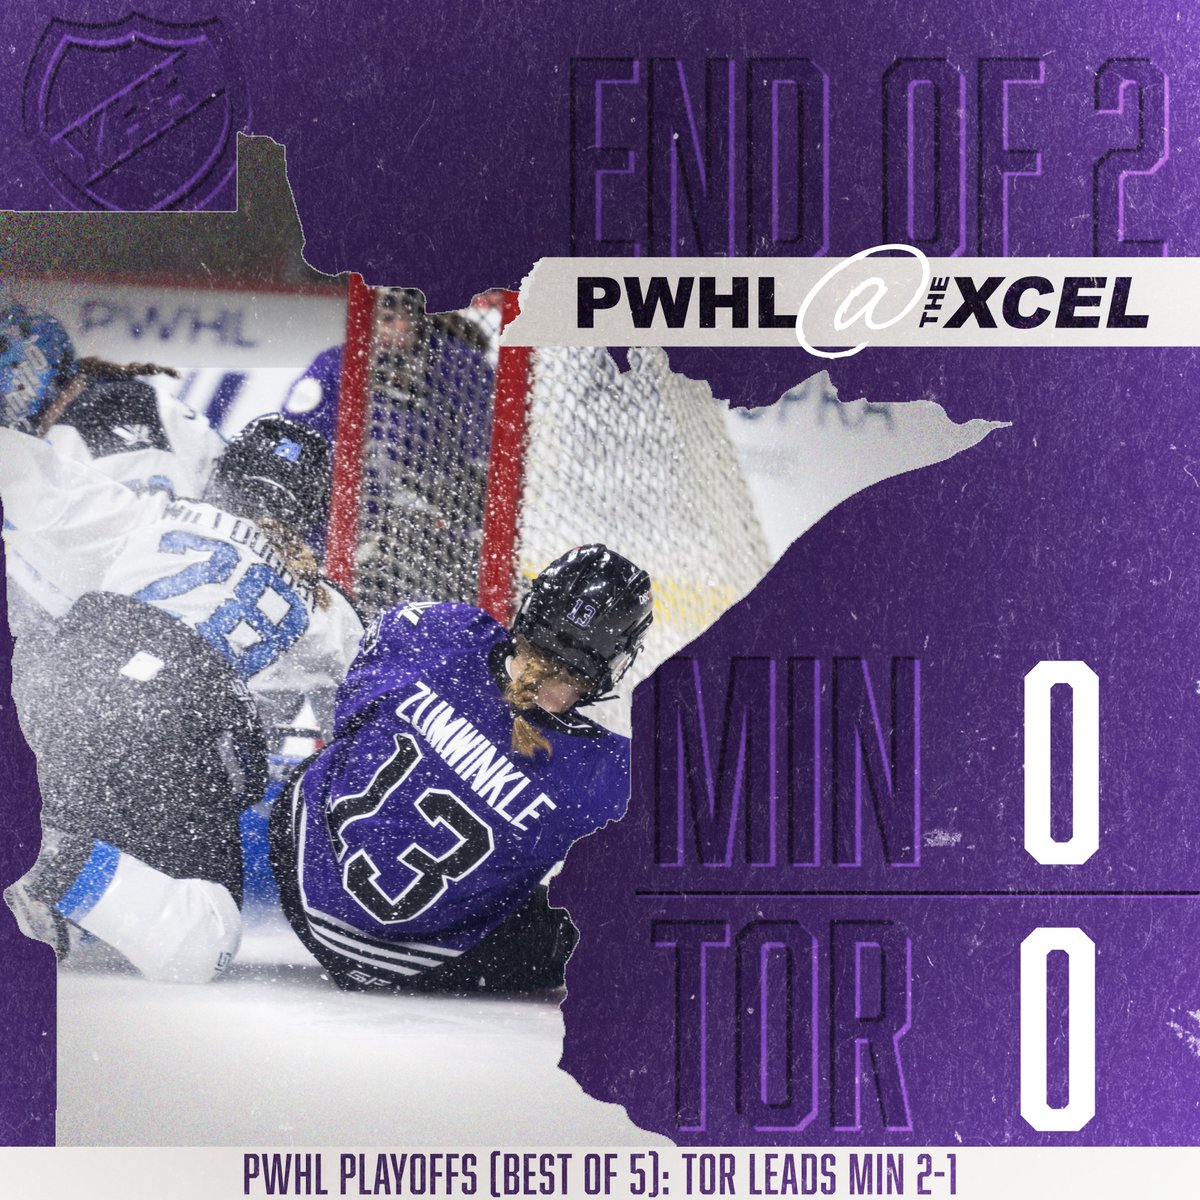 PWHL MN Still a tie-game with not a lot of chances for either team. Minnesota's fate all comes down to period 3. SOG: 9-9